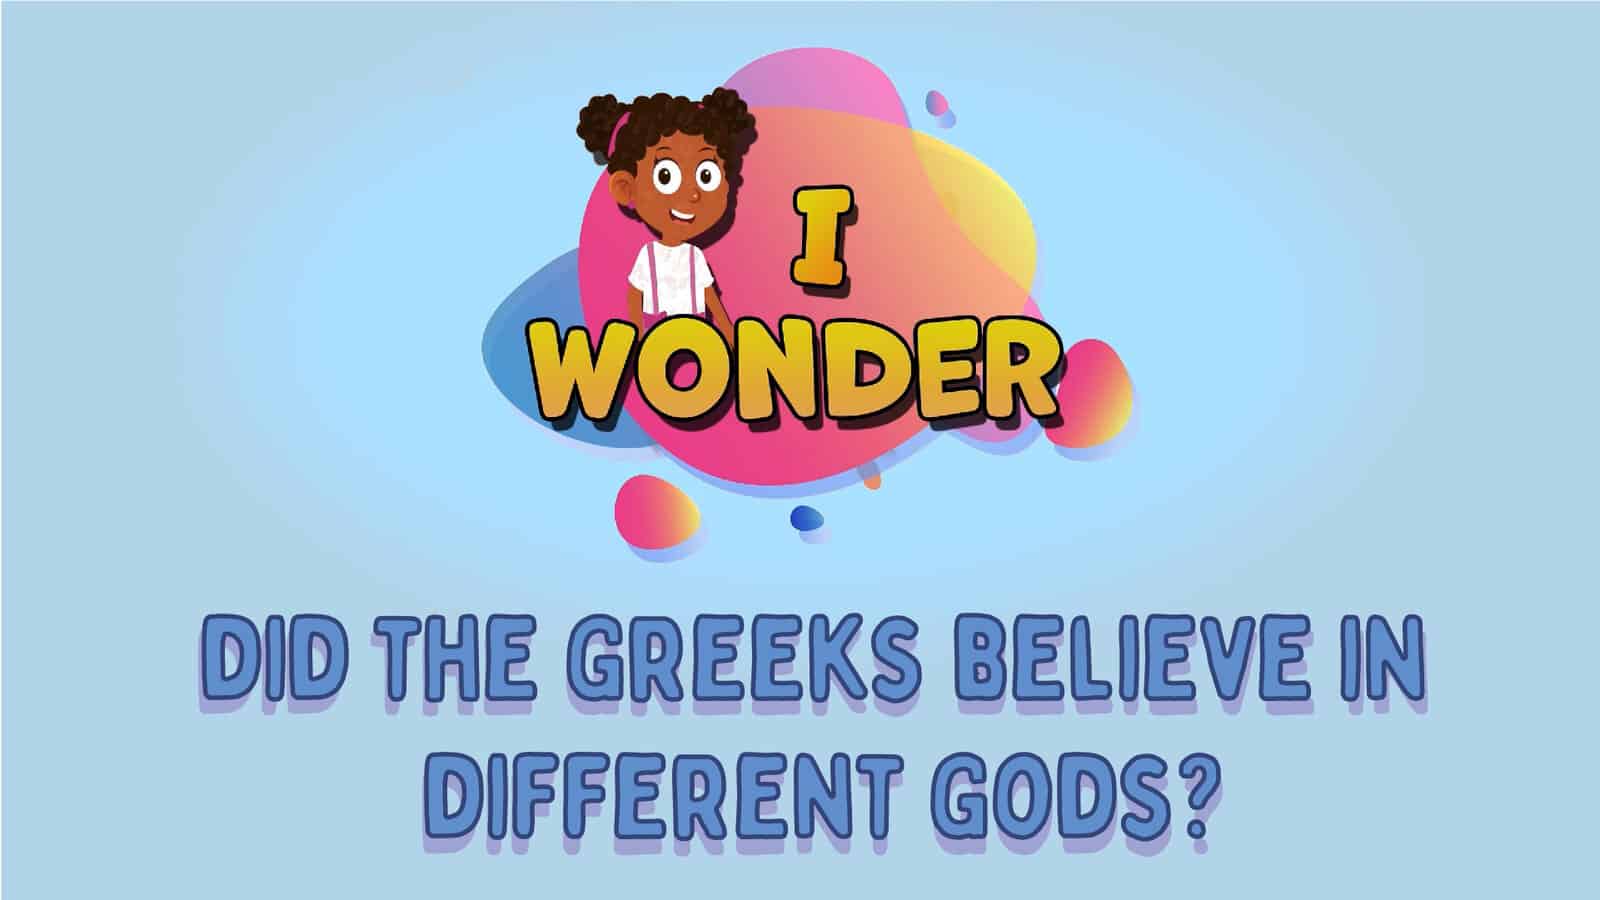 Did The Greeks Believe In Different Gods?